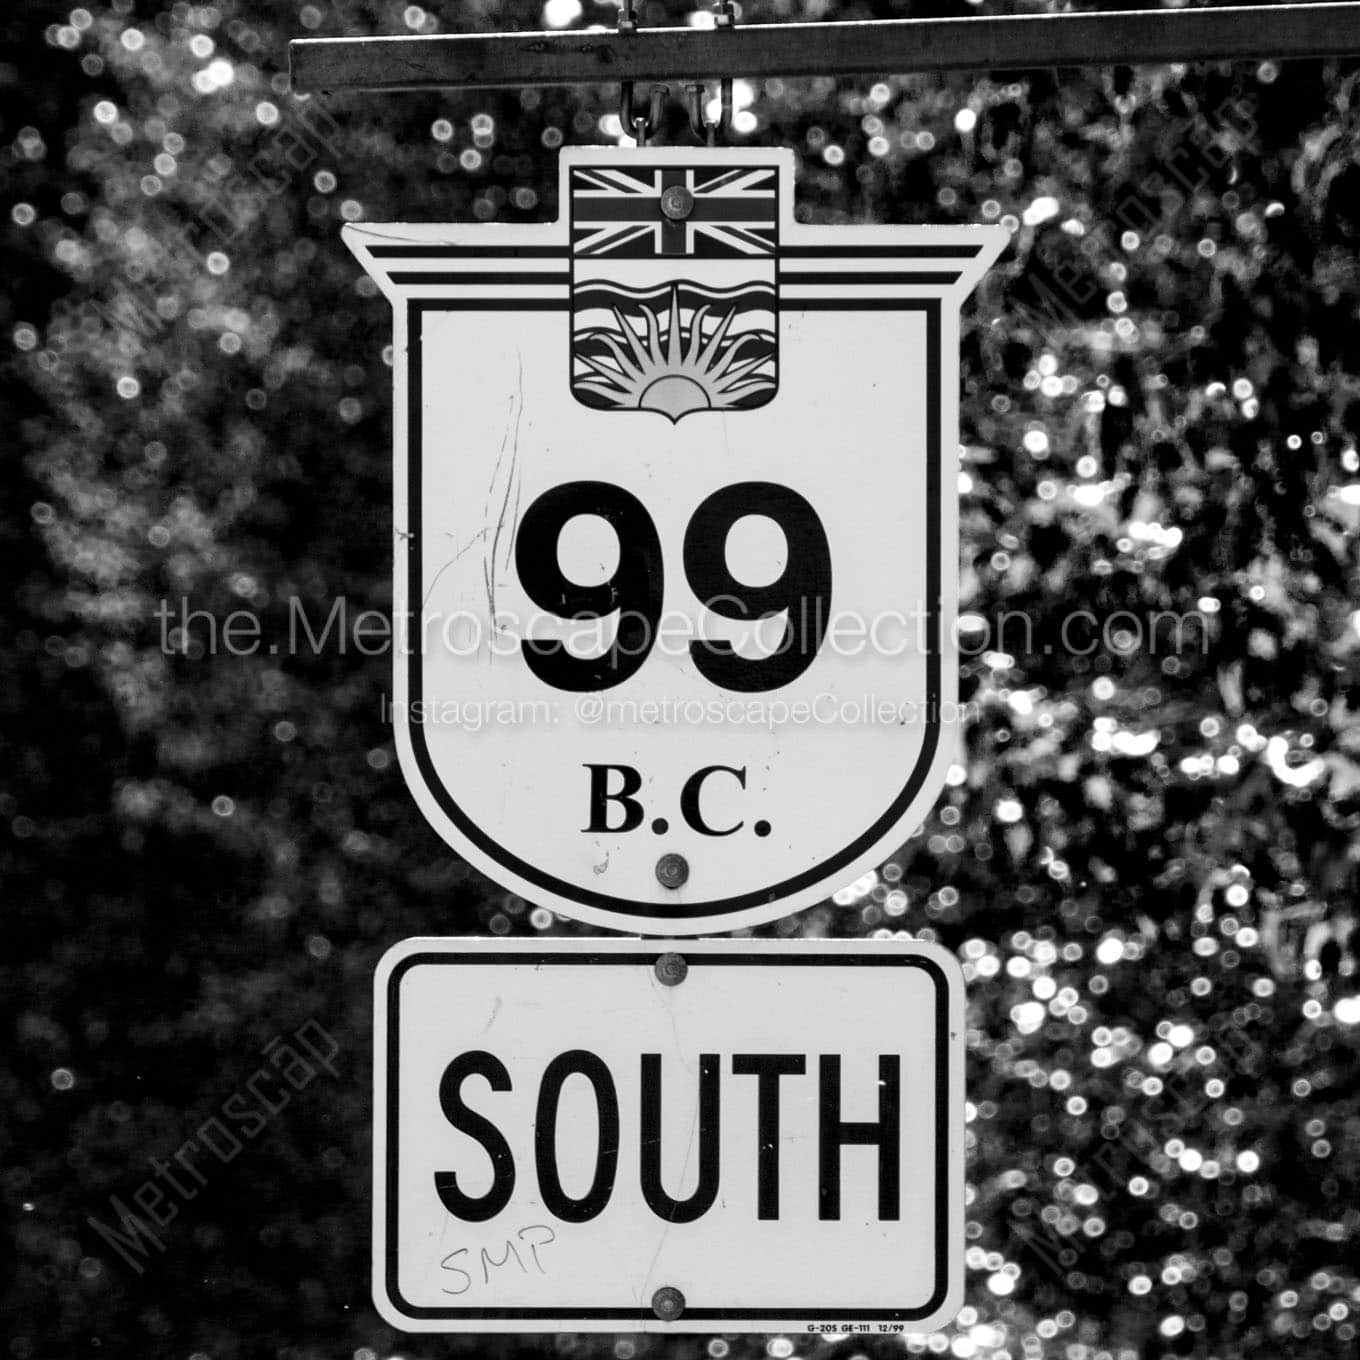 bc route 99 south sign Black & White Office Art